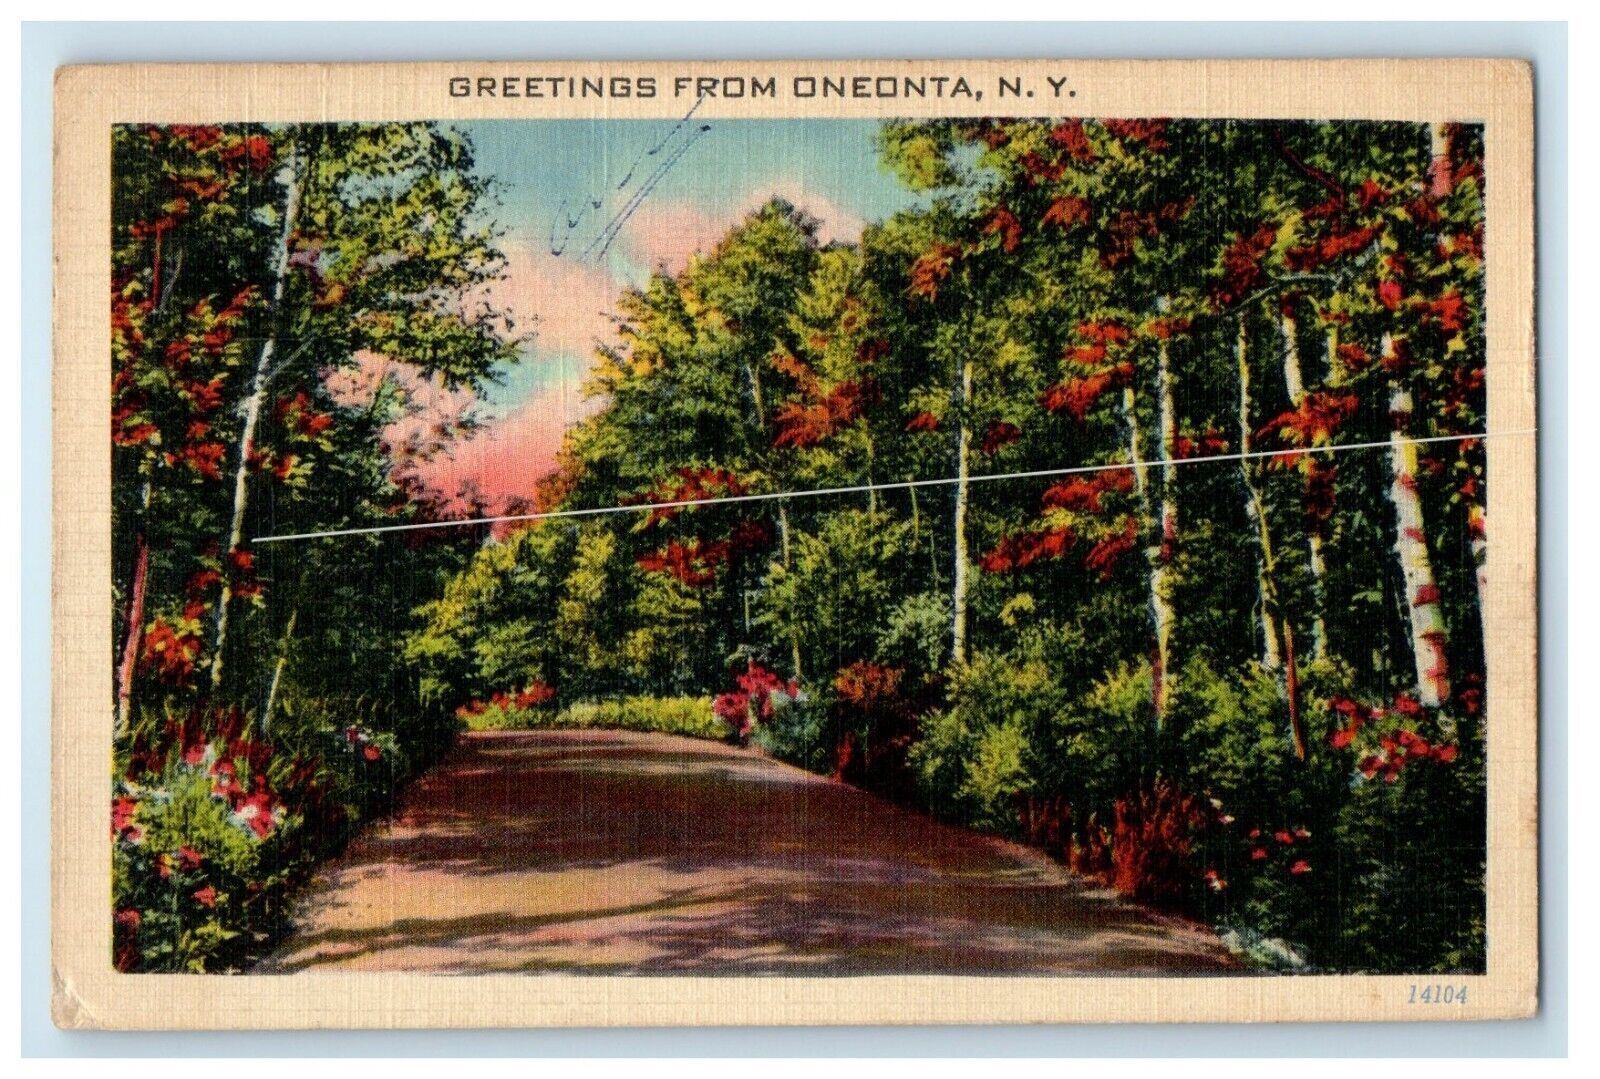 1943 Greetings From Oneonta New York NY, Road View Posted Vintage Postcard